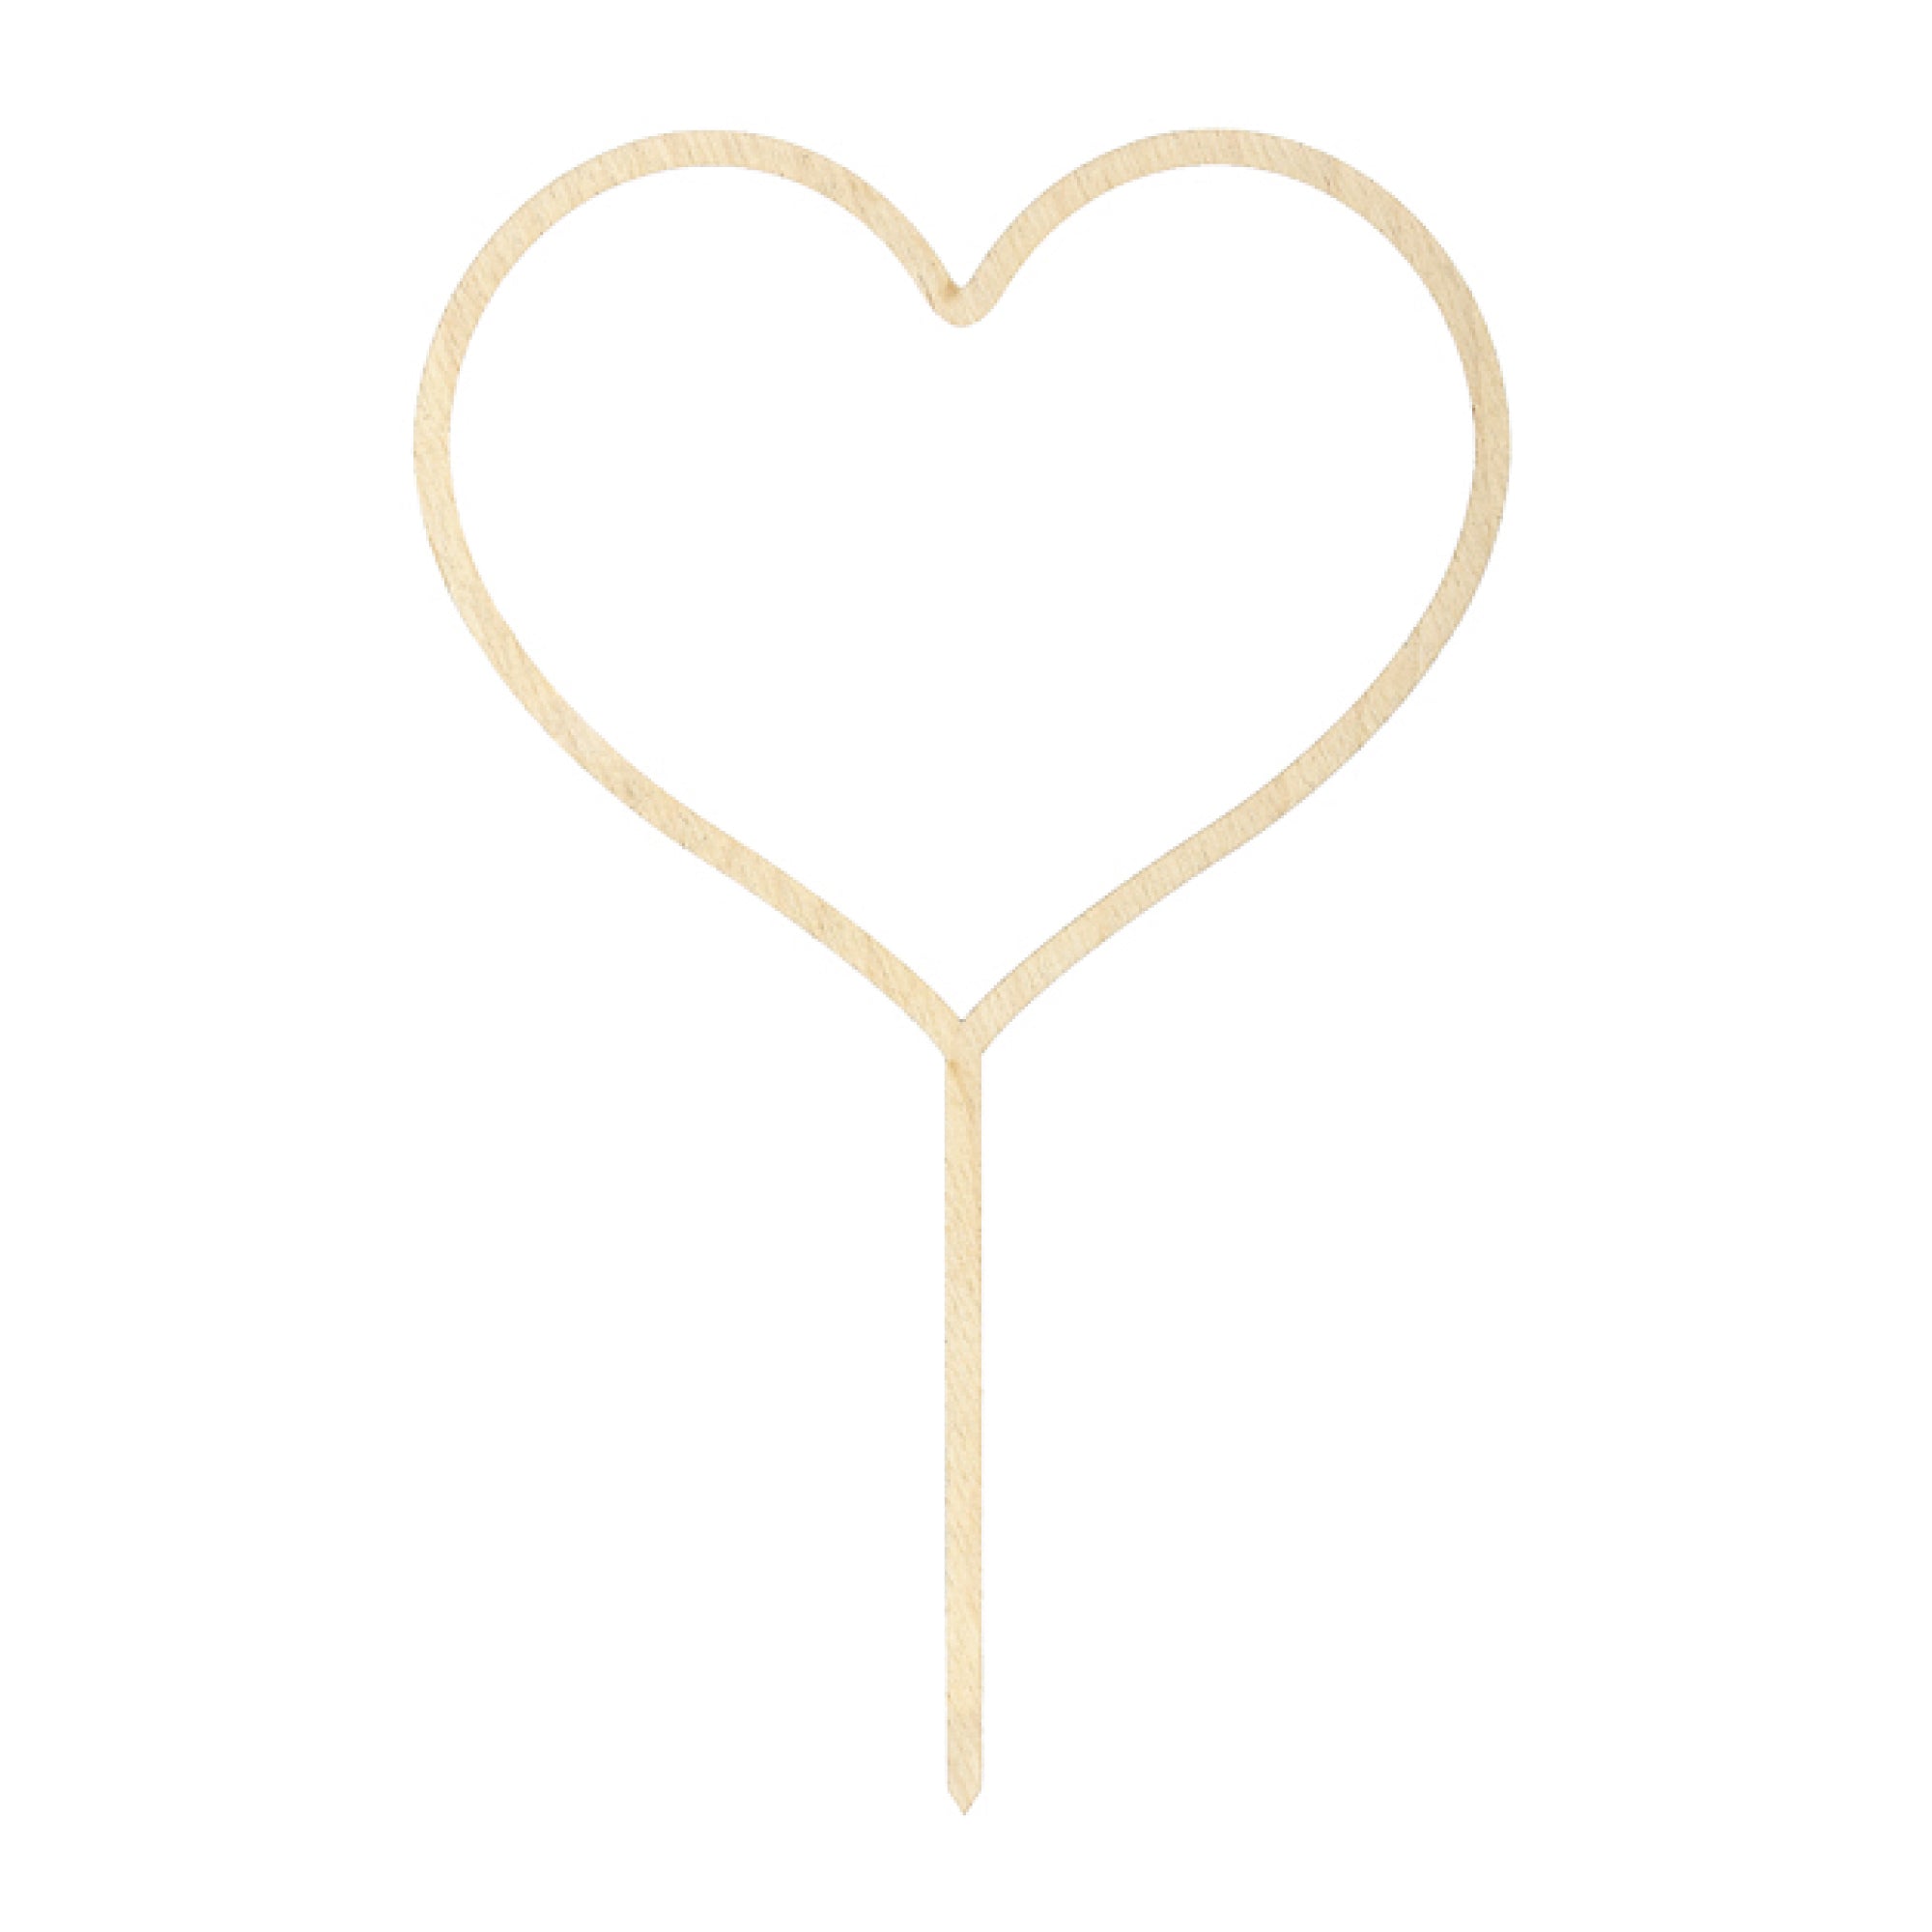 Wooden Heart Cake Topper - The Party Darling